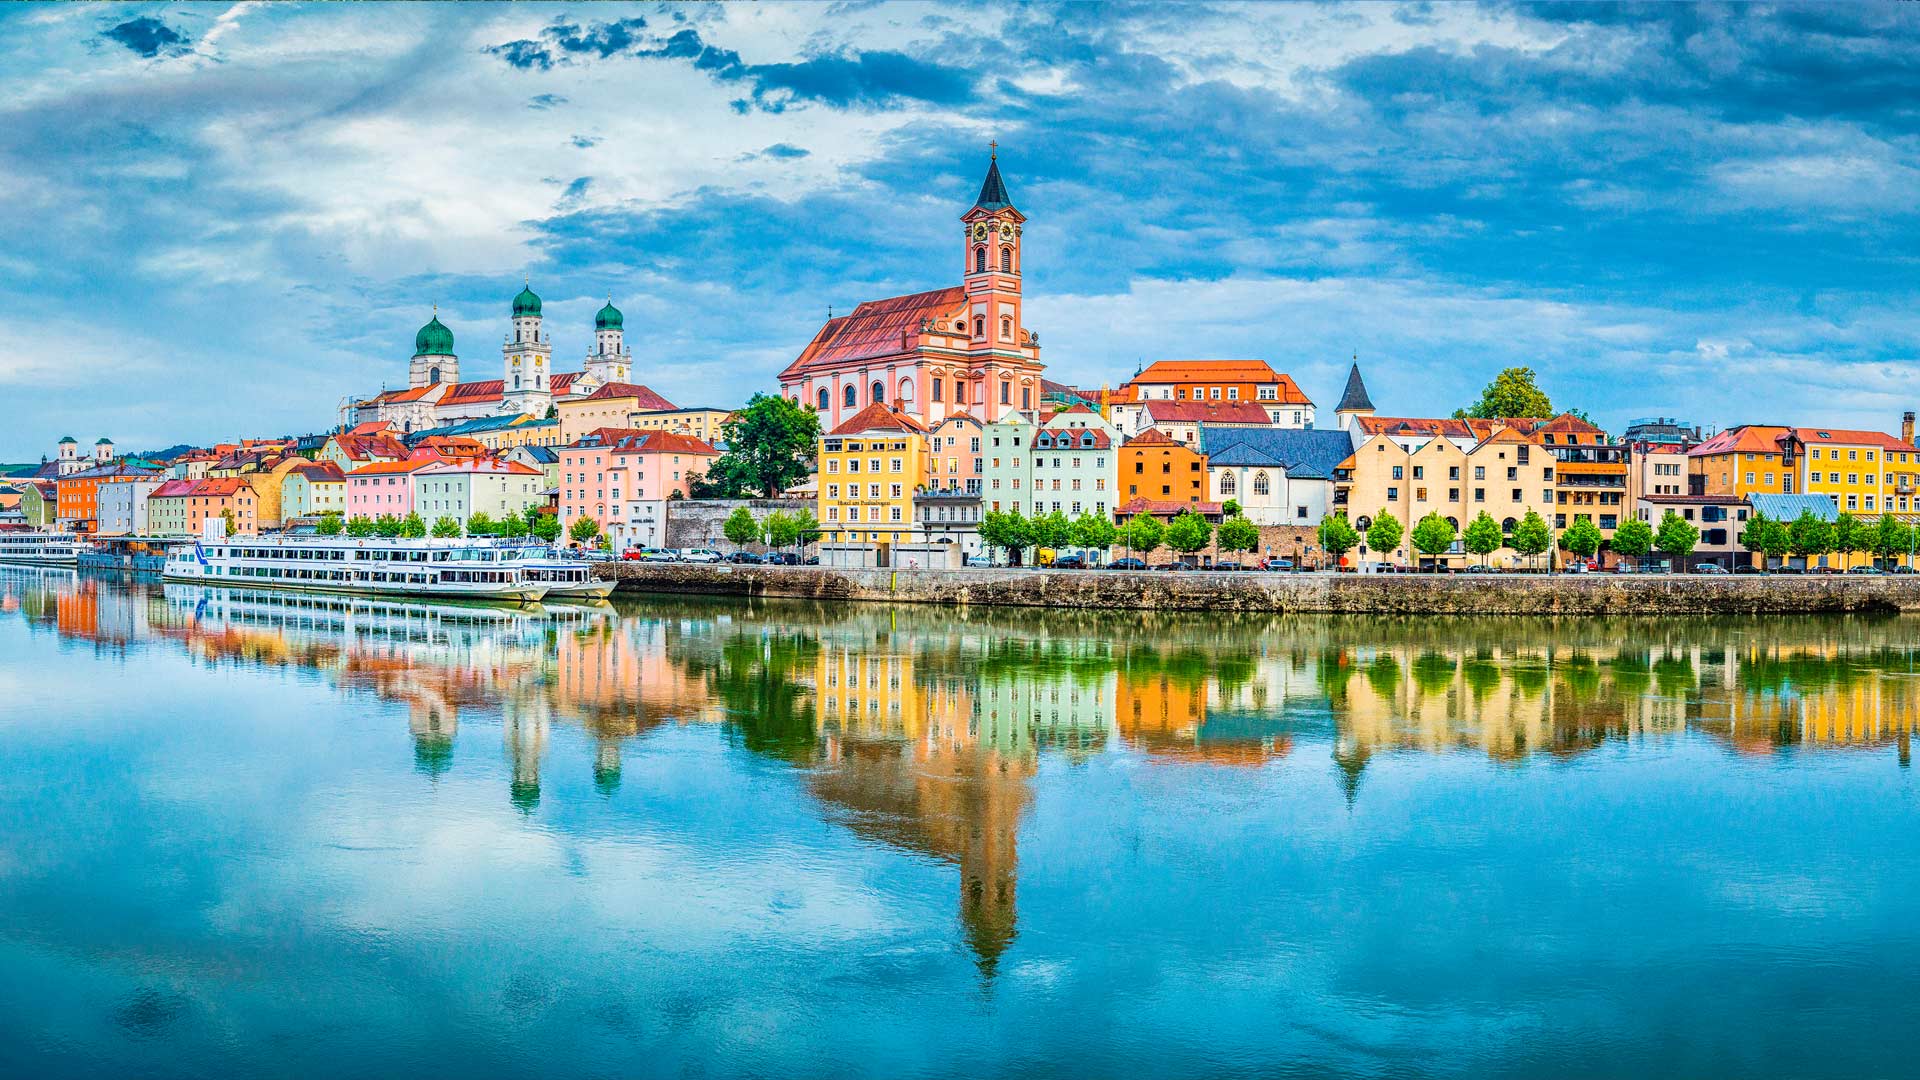 The city of Passau reflecting in the Danube river